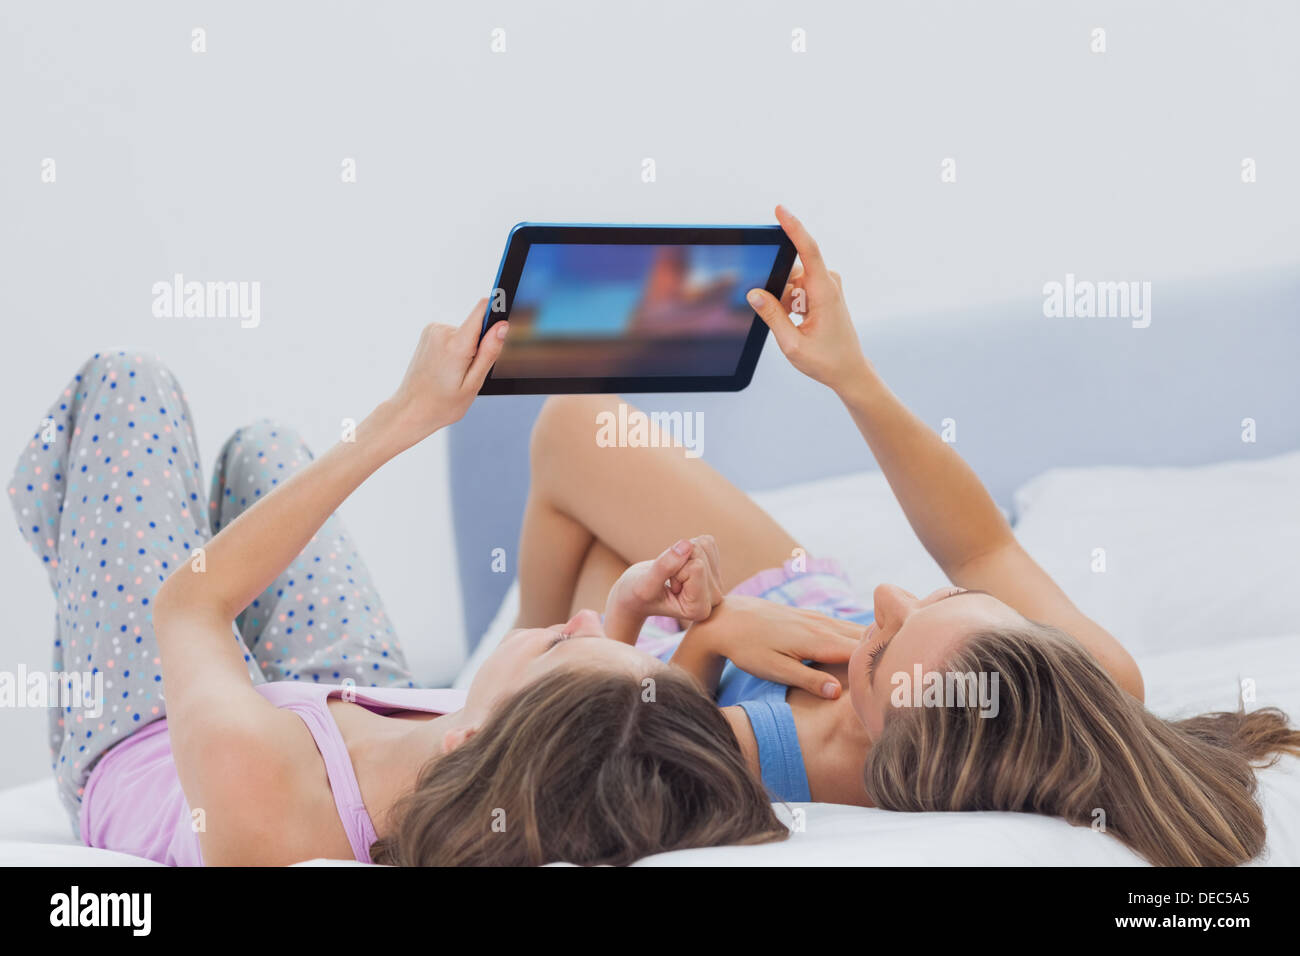 Friends wearing pajamas holding tablet Stock Photo